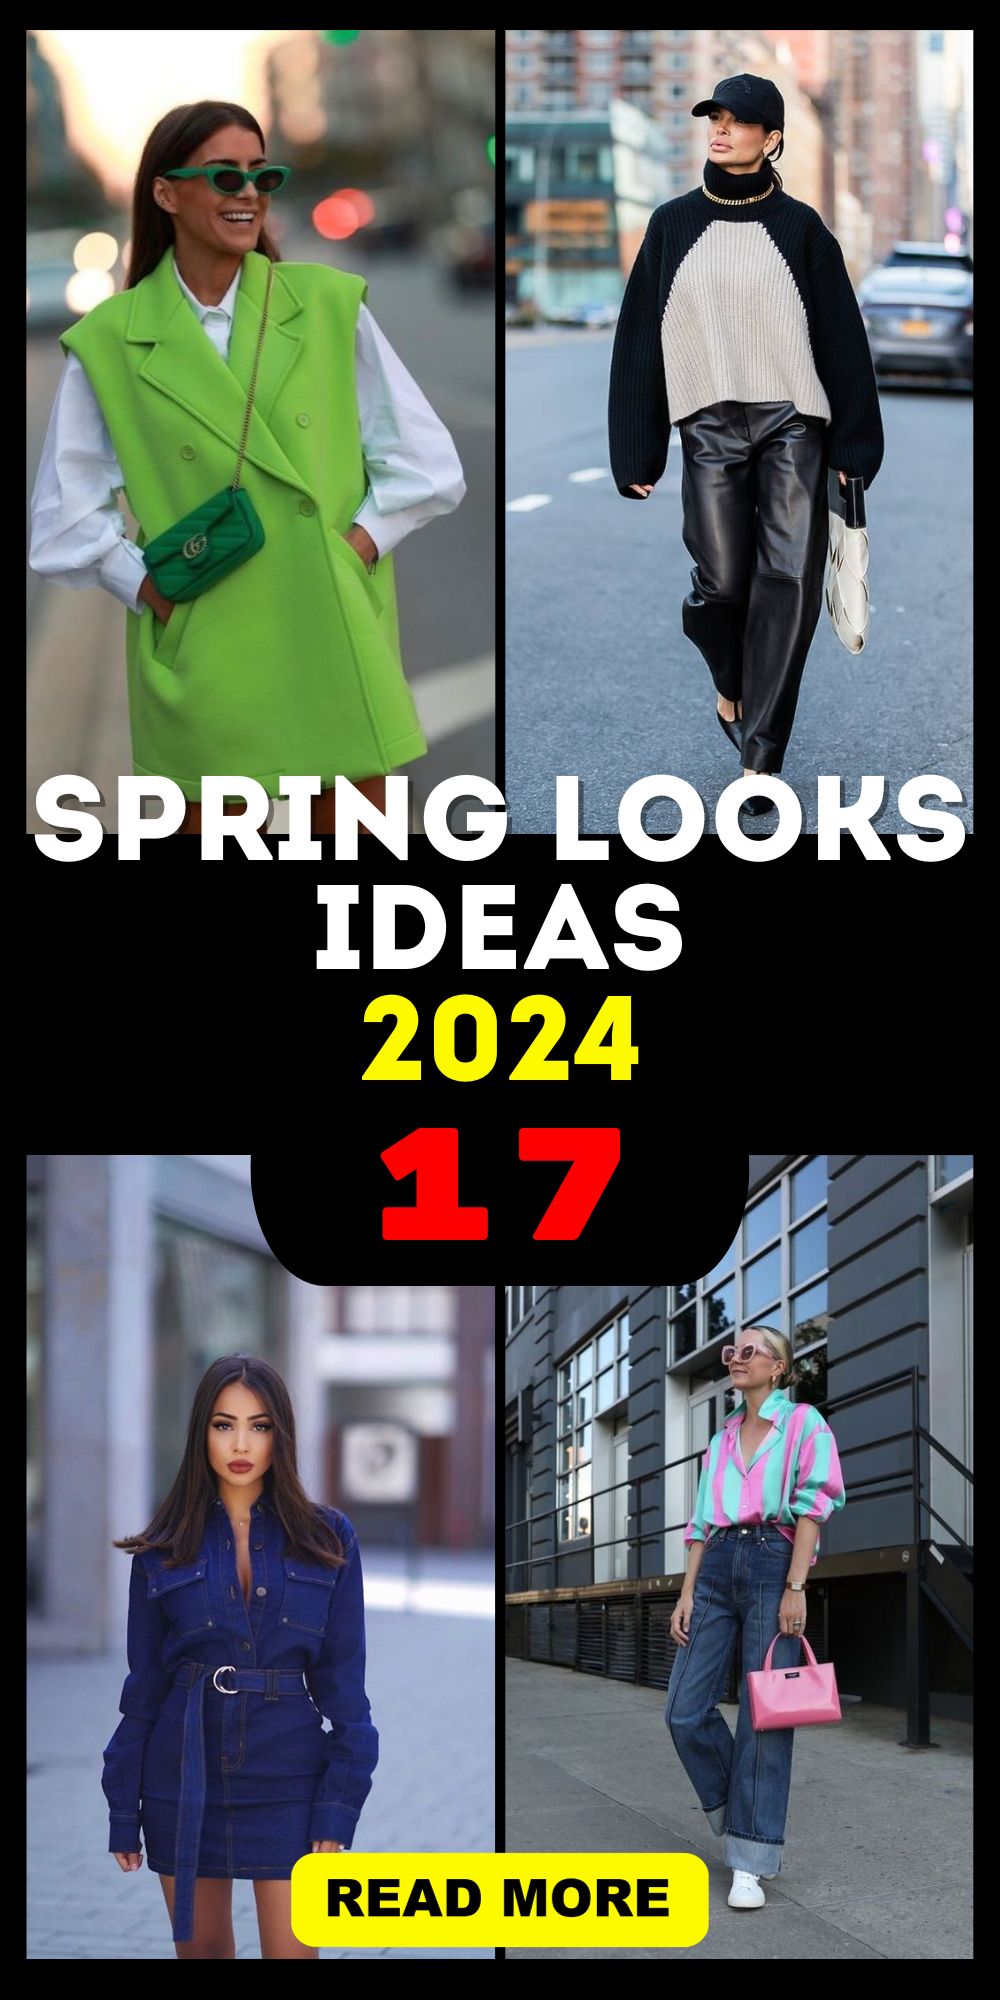 Spring Looks 2024: Discover the Season's Chic Fashion Trends